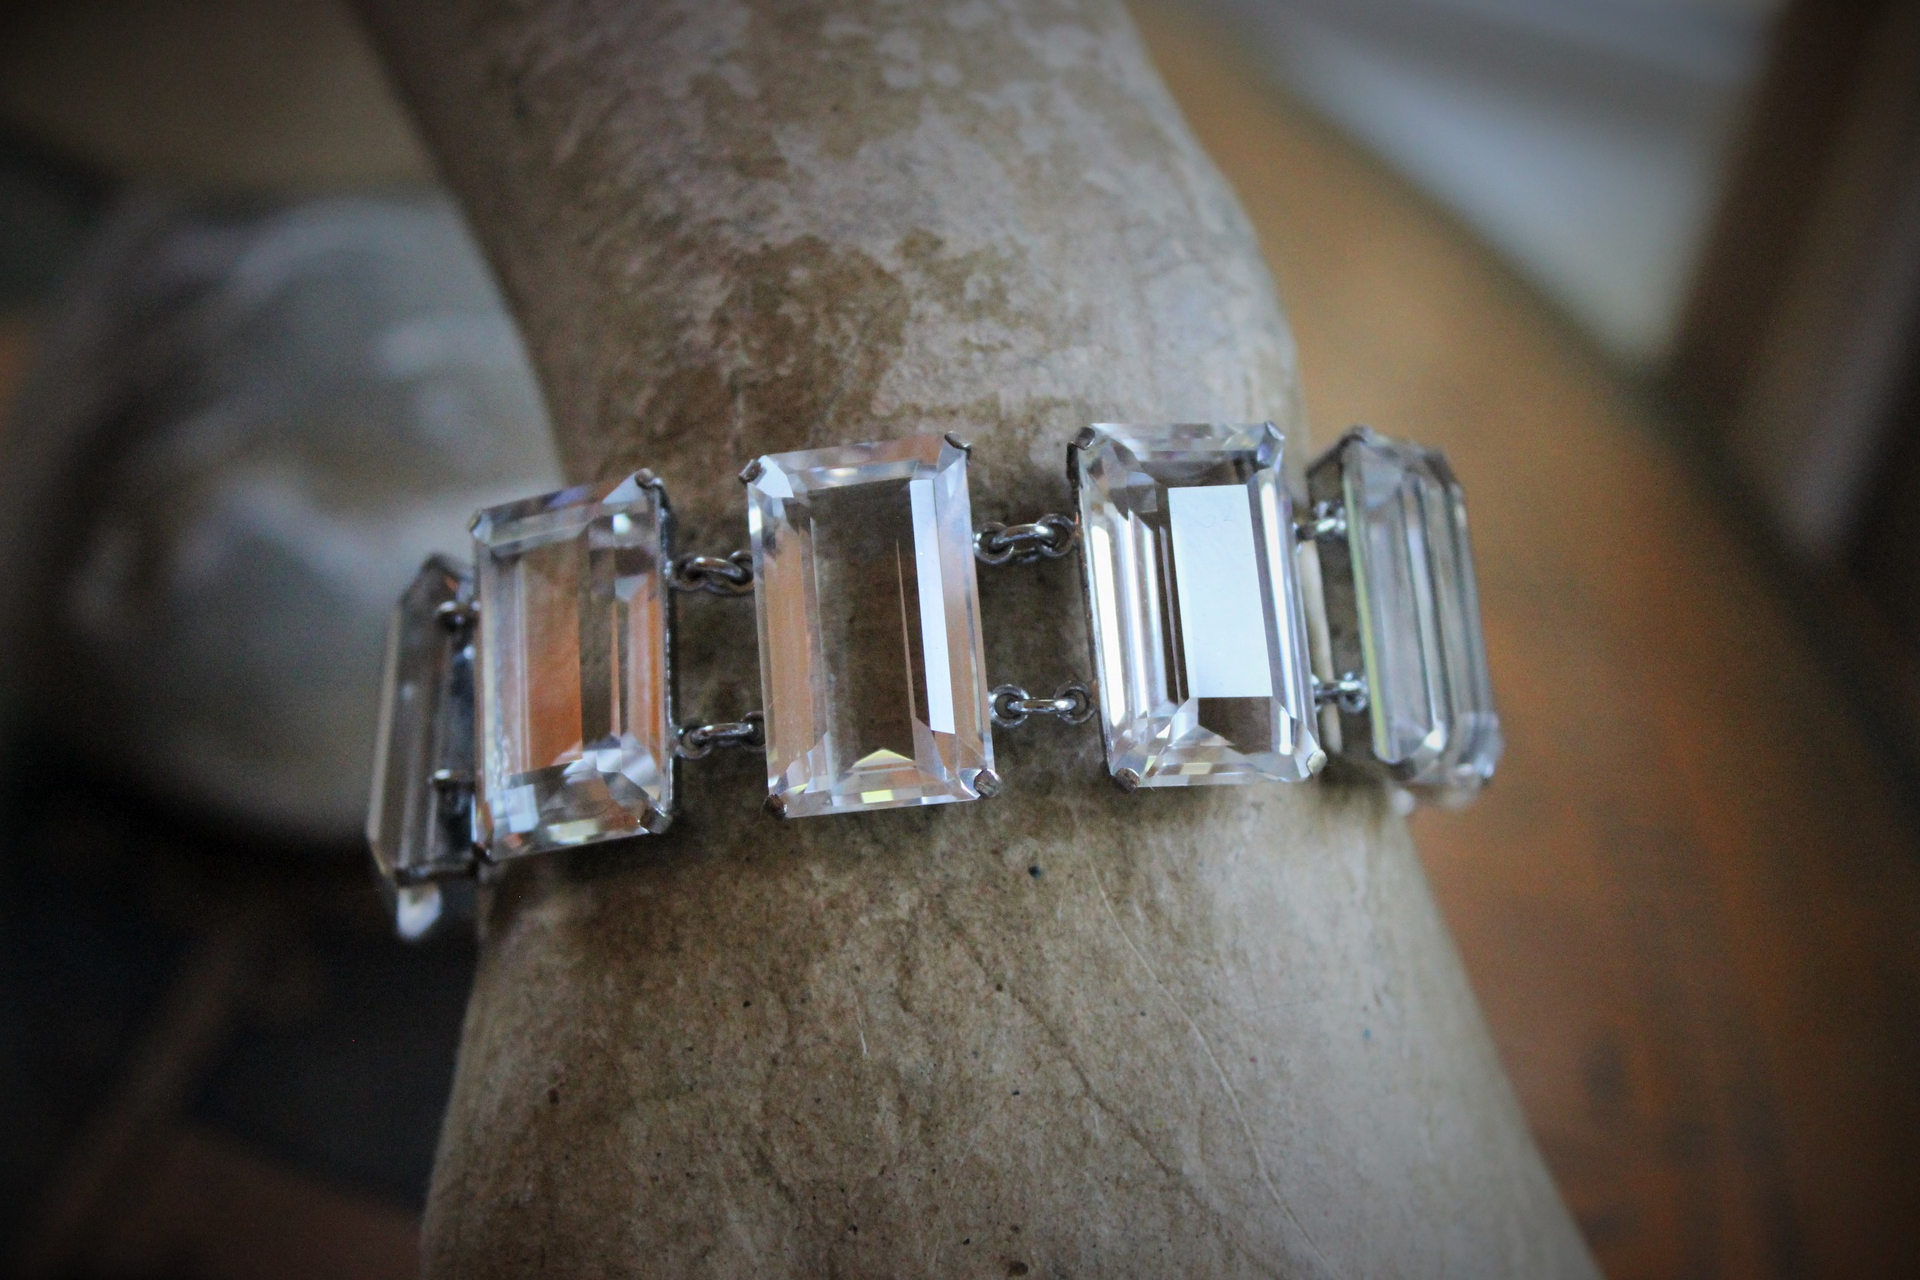 SOLD to C Exquisite Vintage 1950's Japan Emerald Cut Step Faceted Rock Crystal Bracelet w/Rare Antique 16th Century St. Stanislaus Relic,Antique Sterling Engraved Puffy Heart and Photo Locket + More!